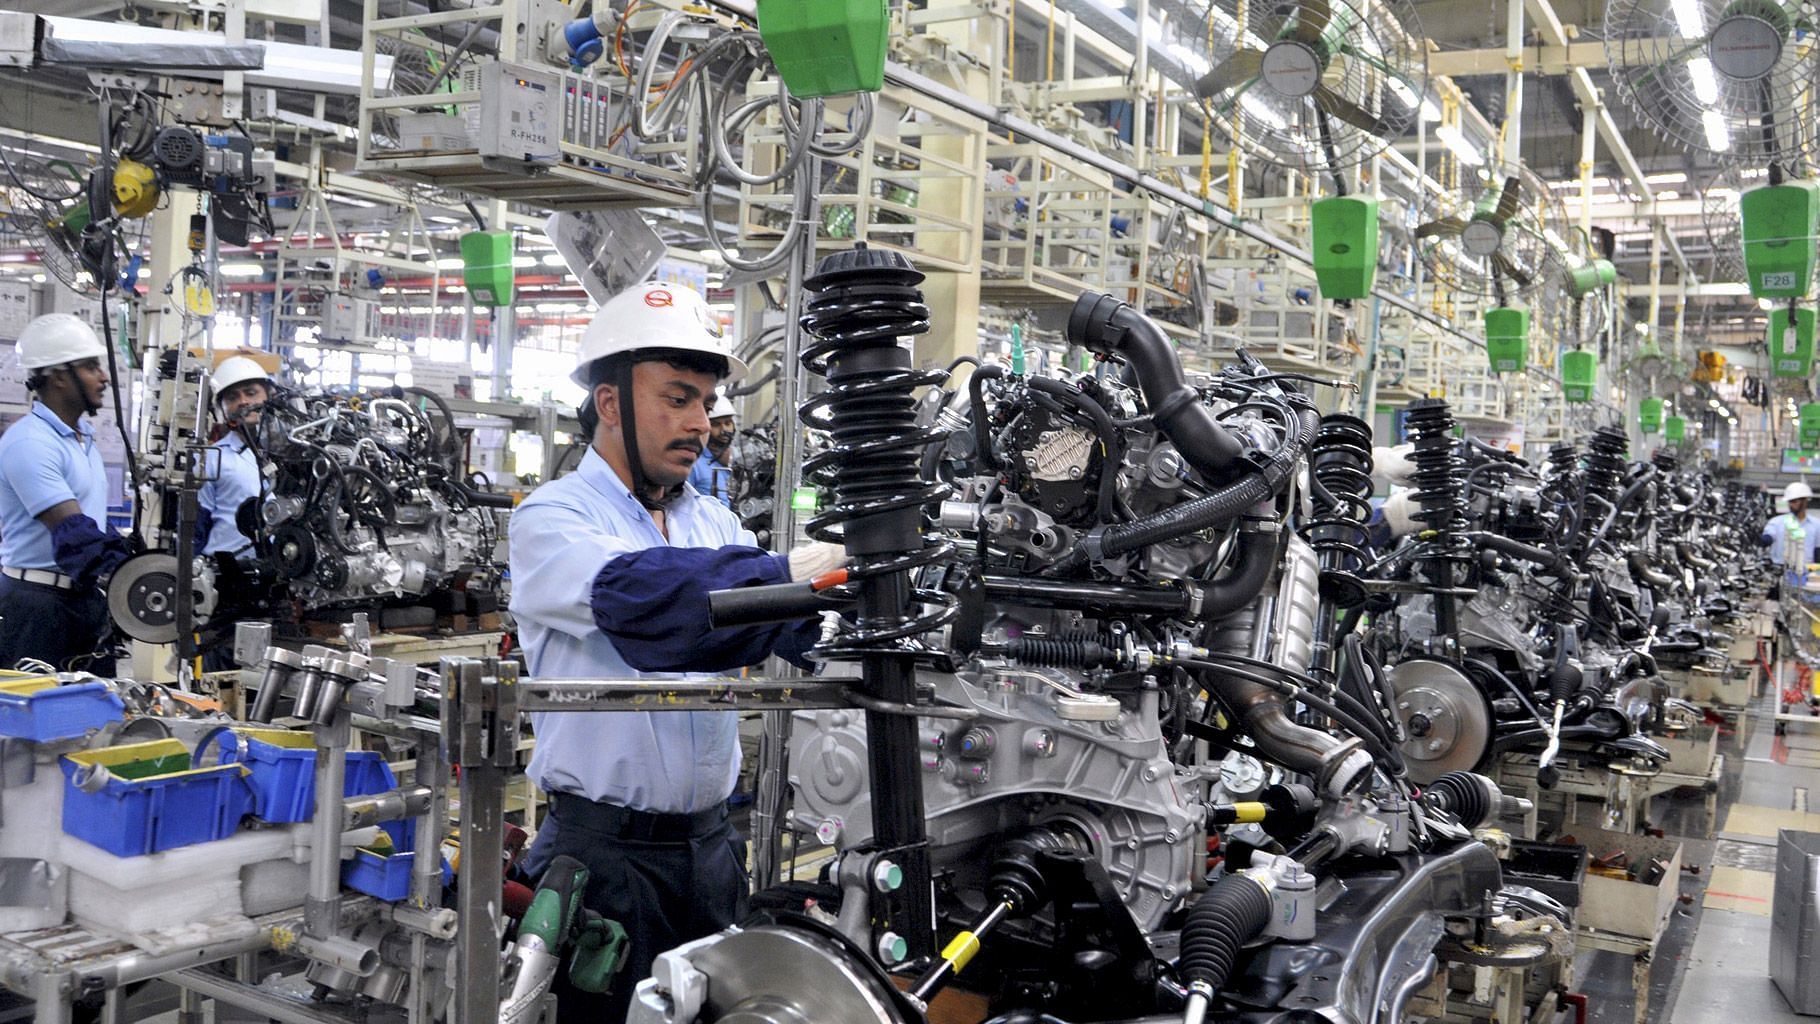 The Index of Industrial Production (IIP) had expanded by 3.8 percent in May 2018. Image used for representation only.